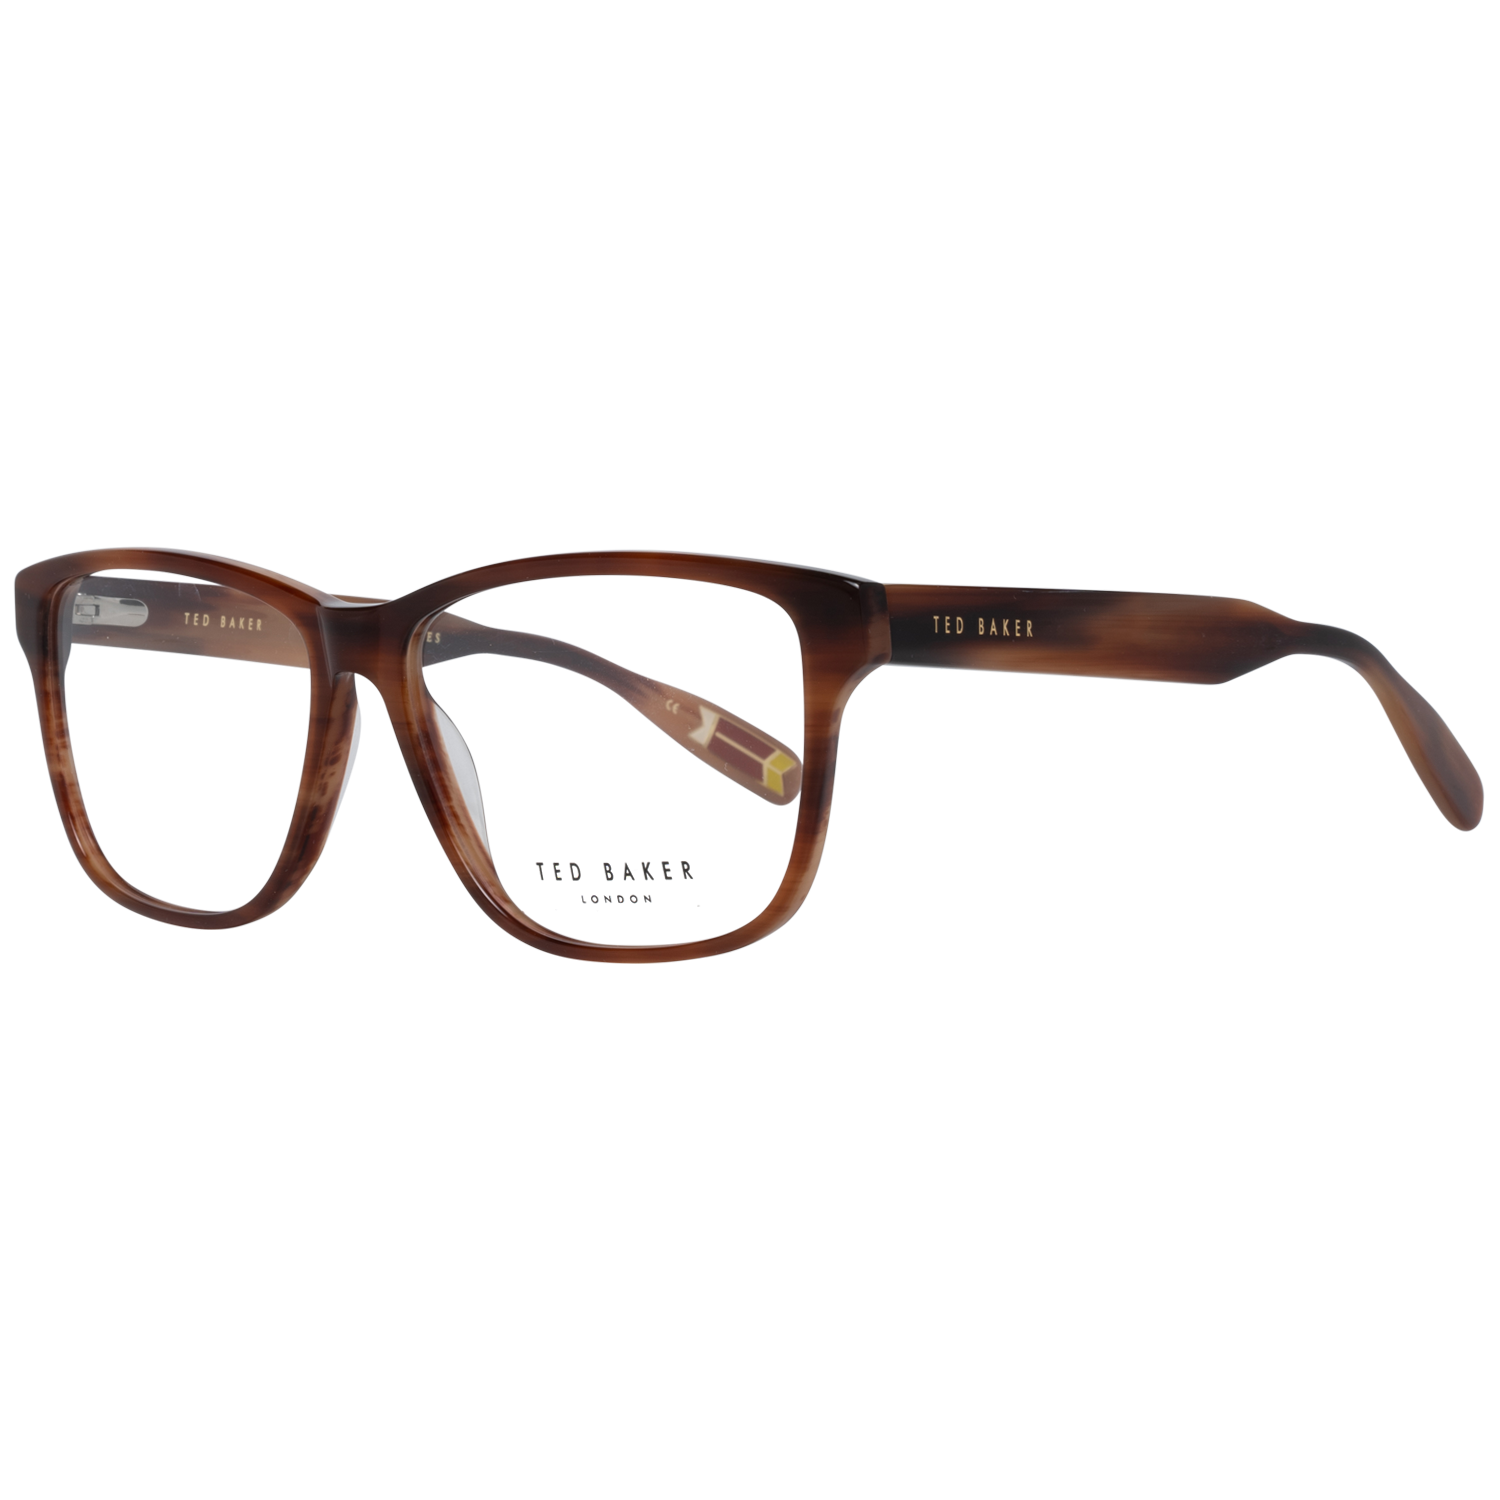 GenderMenMain colorBrownFrame colorBrownFrame materialPlasticSize56-14-145Lenses width56mmLenses heigth43mmBridge length14mmFrame width140mmTemple length145mmShipment includesCase, Cleaning clothStyleFull-RimSpring hingeYes